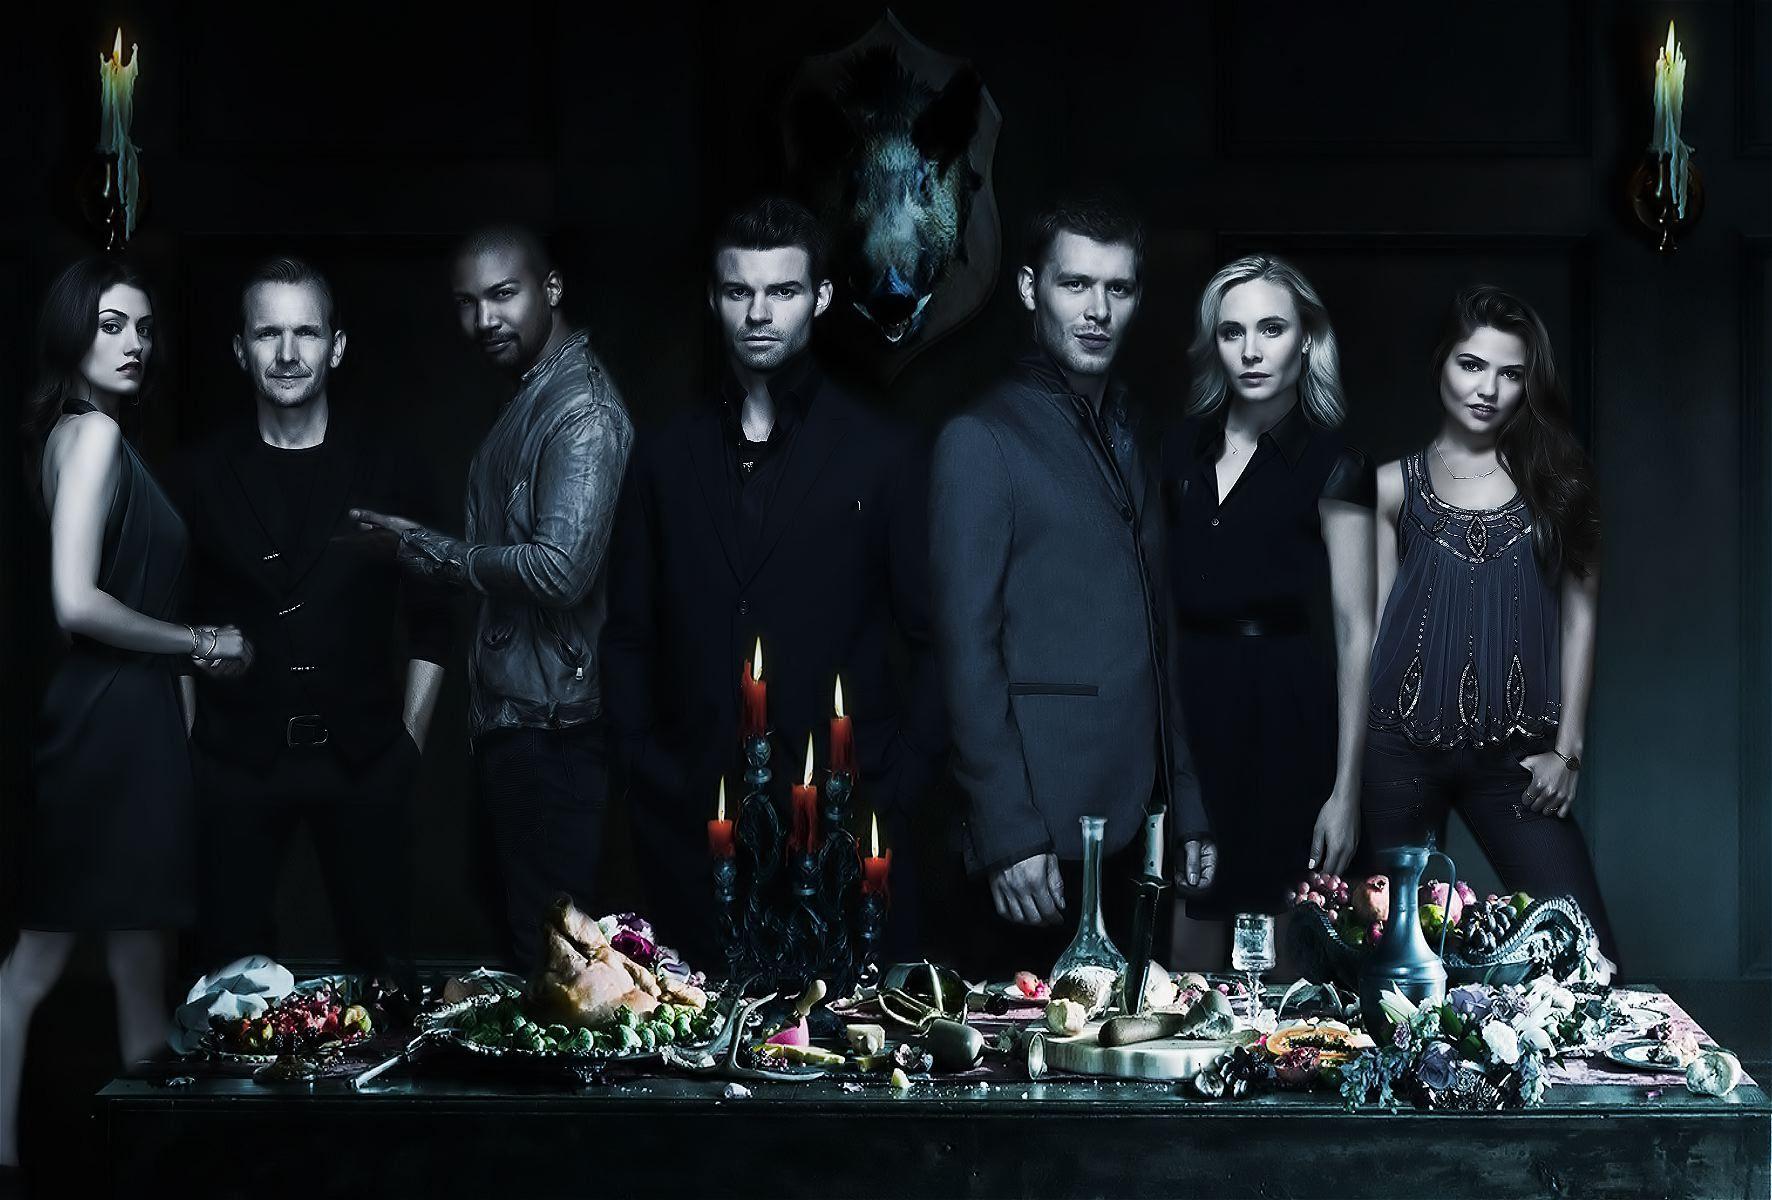 Most Cherised Moments of 'The Originals' where you can